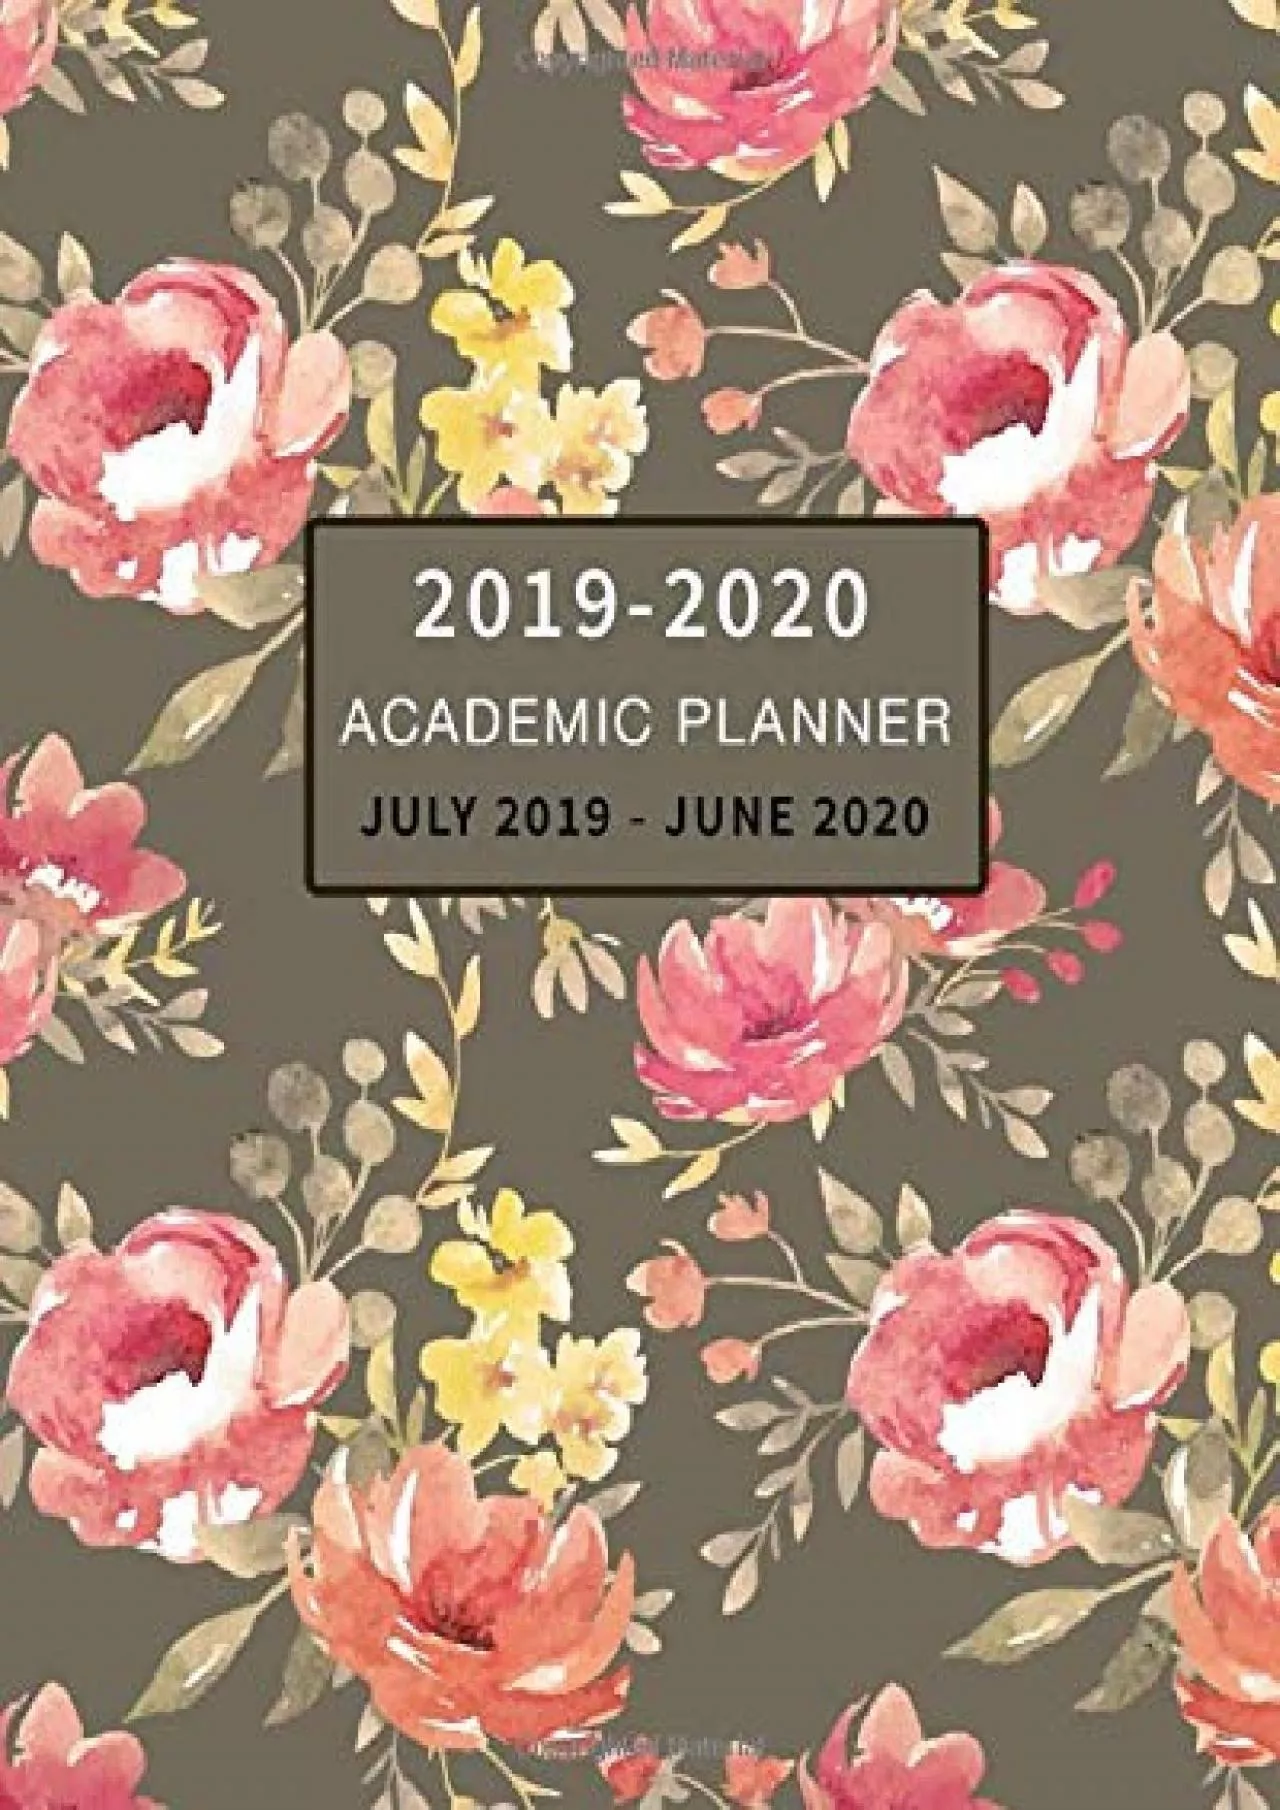 [DOWNLOAD] Academic Planner 2019-2020 July 2019 - June 2020: Daily, Weekly and Monthly